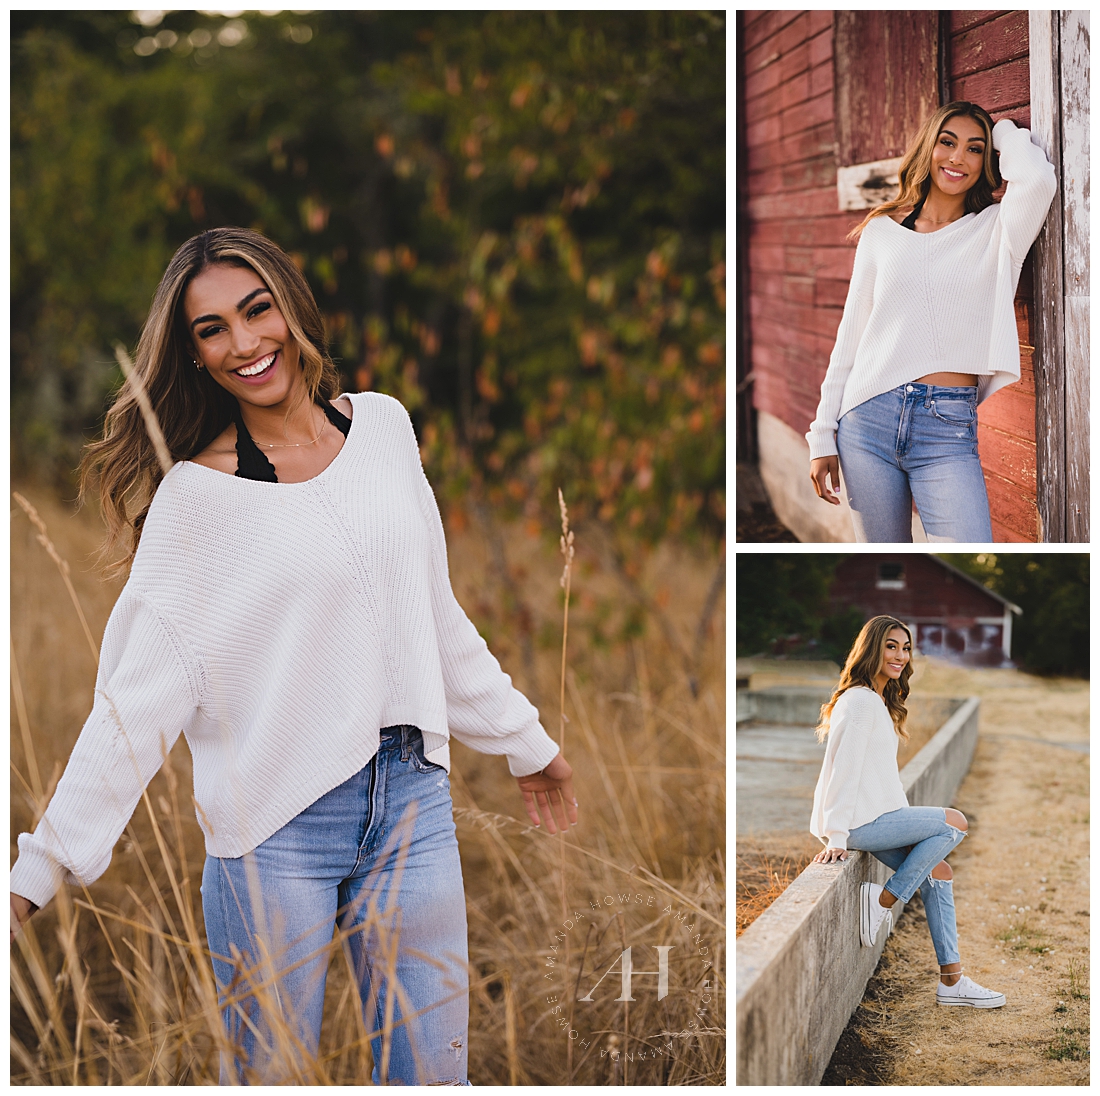 Fun High School Styles to Wear All Year Long | Senior Portrait Outfit Inspo, White Sweater and Ripped Jeans Combo, Rustic Senior Photoshoot with Red Barn | Photographed by the Best Tacoma Senior Photographer Amanda Howse Photography